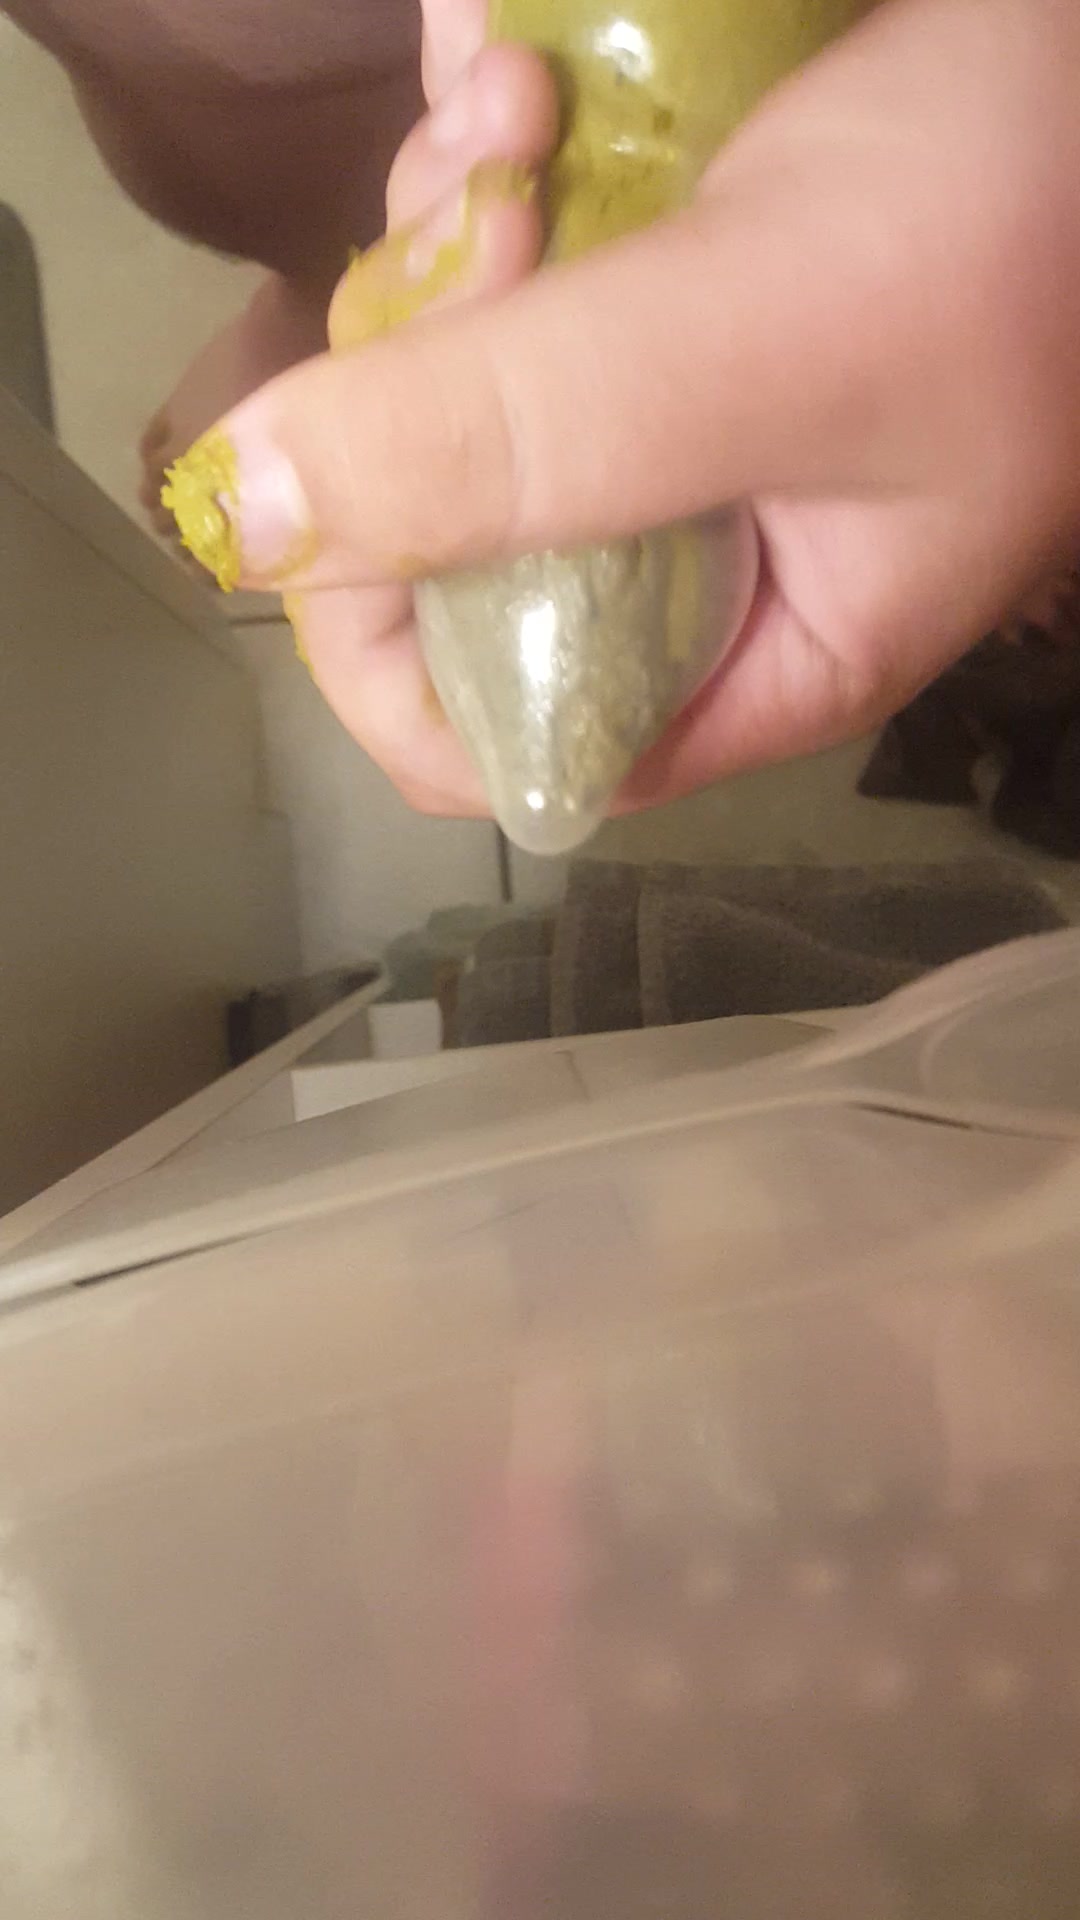 Wearing, pissing, and cumming in a shit filled condom - ScatFap - scat porn search